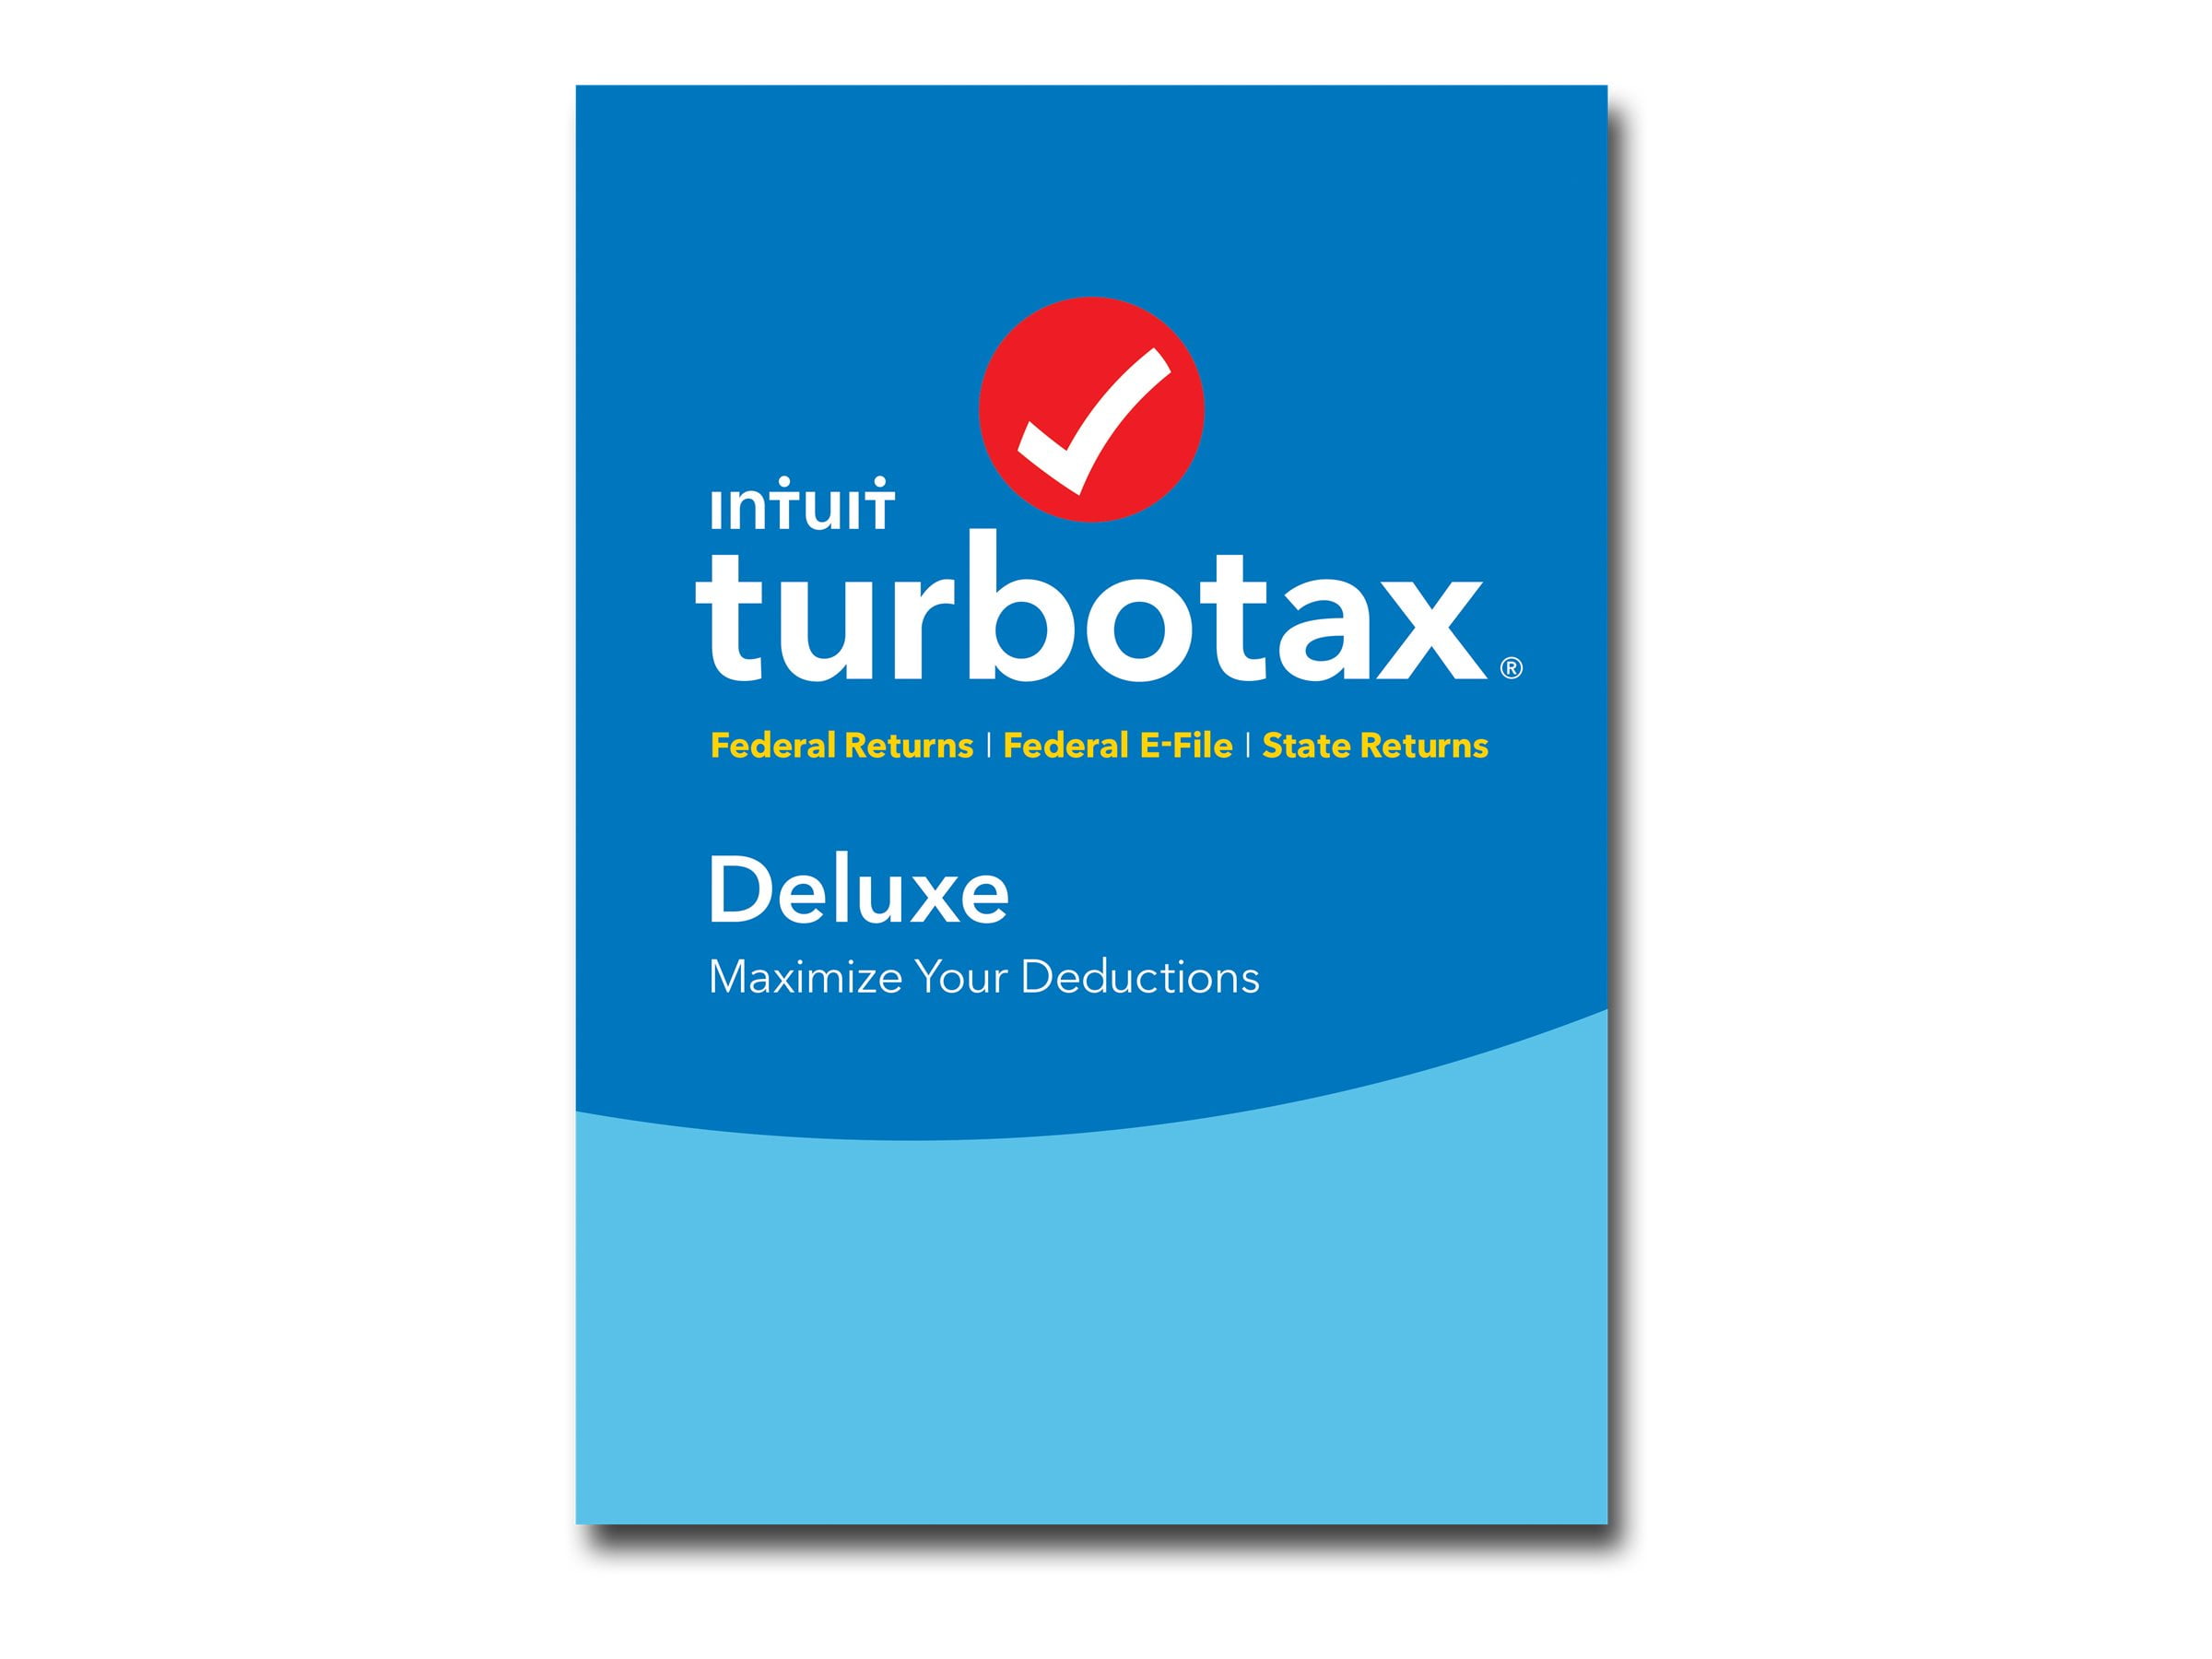 Intuit Turbotax Maximize Your Deductions Deluxe Software [Old Version